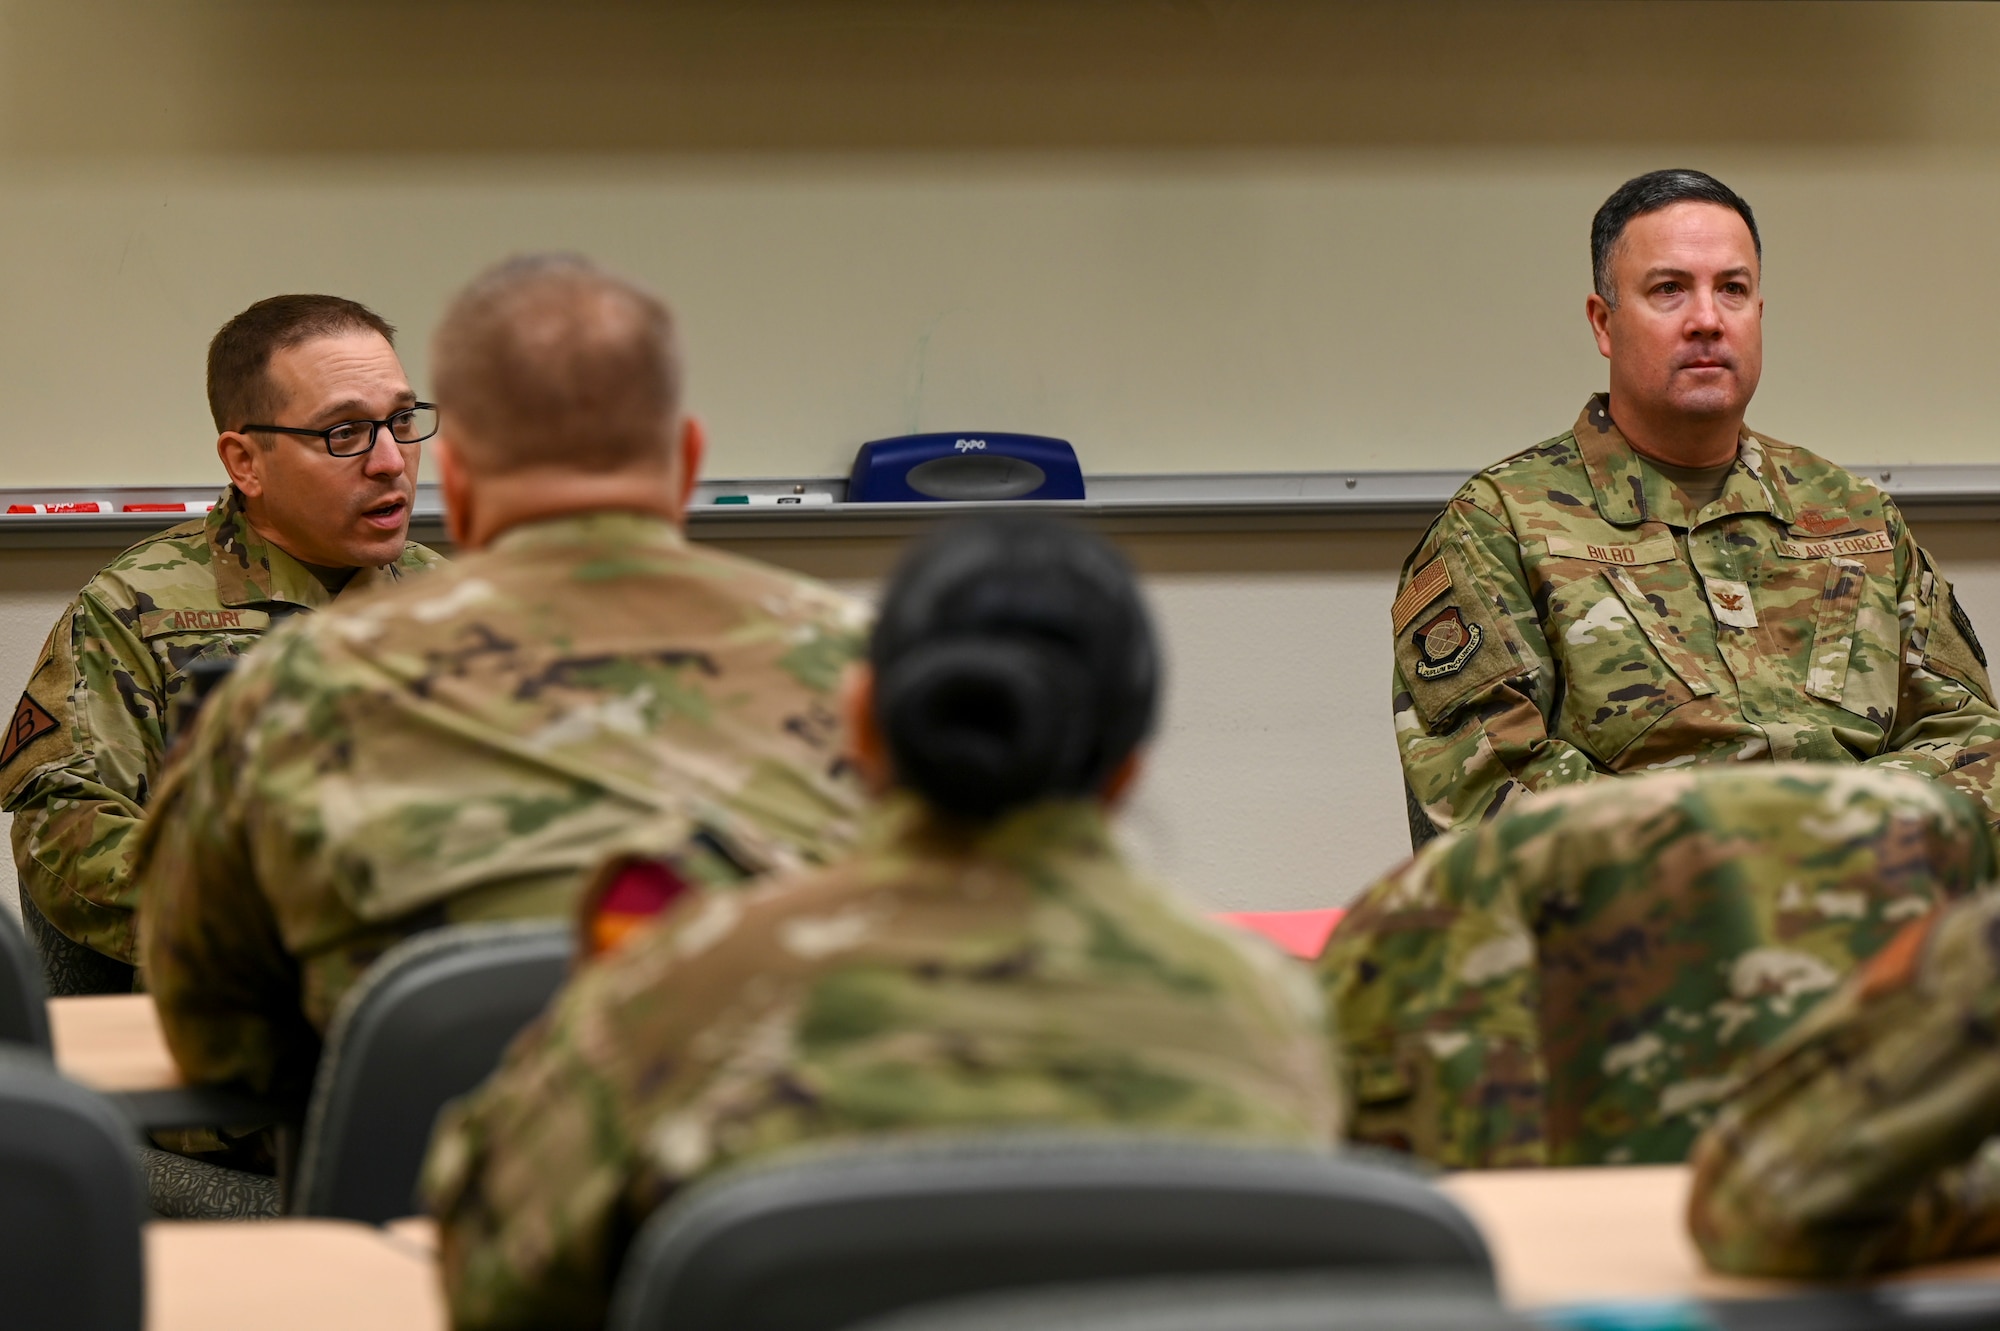 Two U.S. Air Force leaders speak to a class